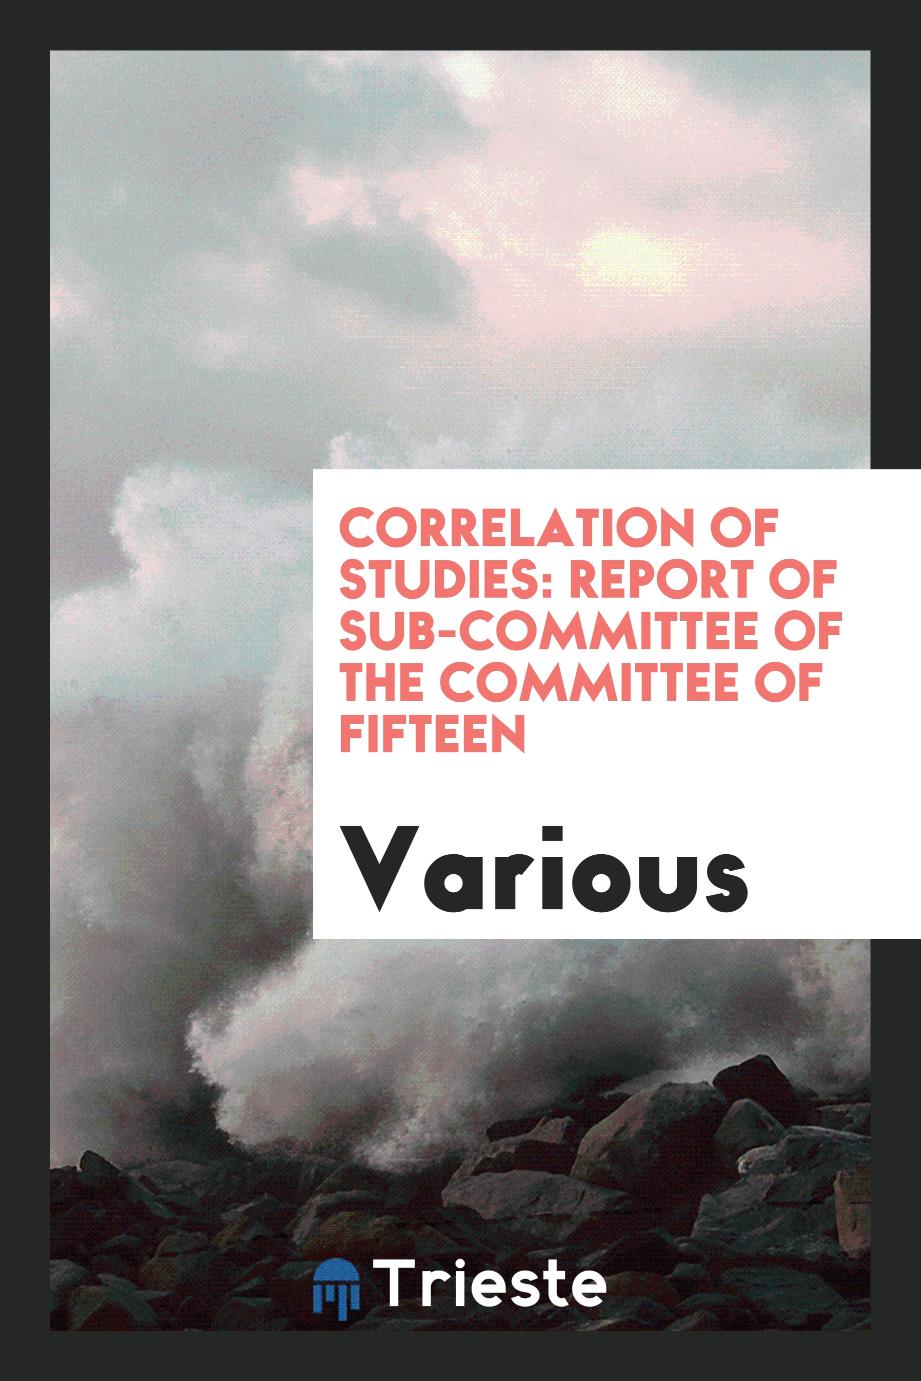 Correlation of Studies: Report of Sub-Committee of the Committee of Fifteen